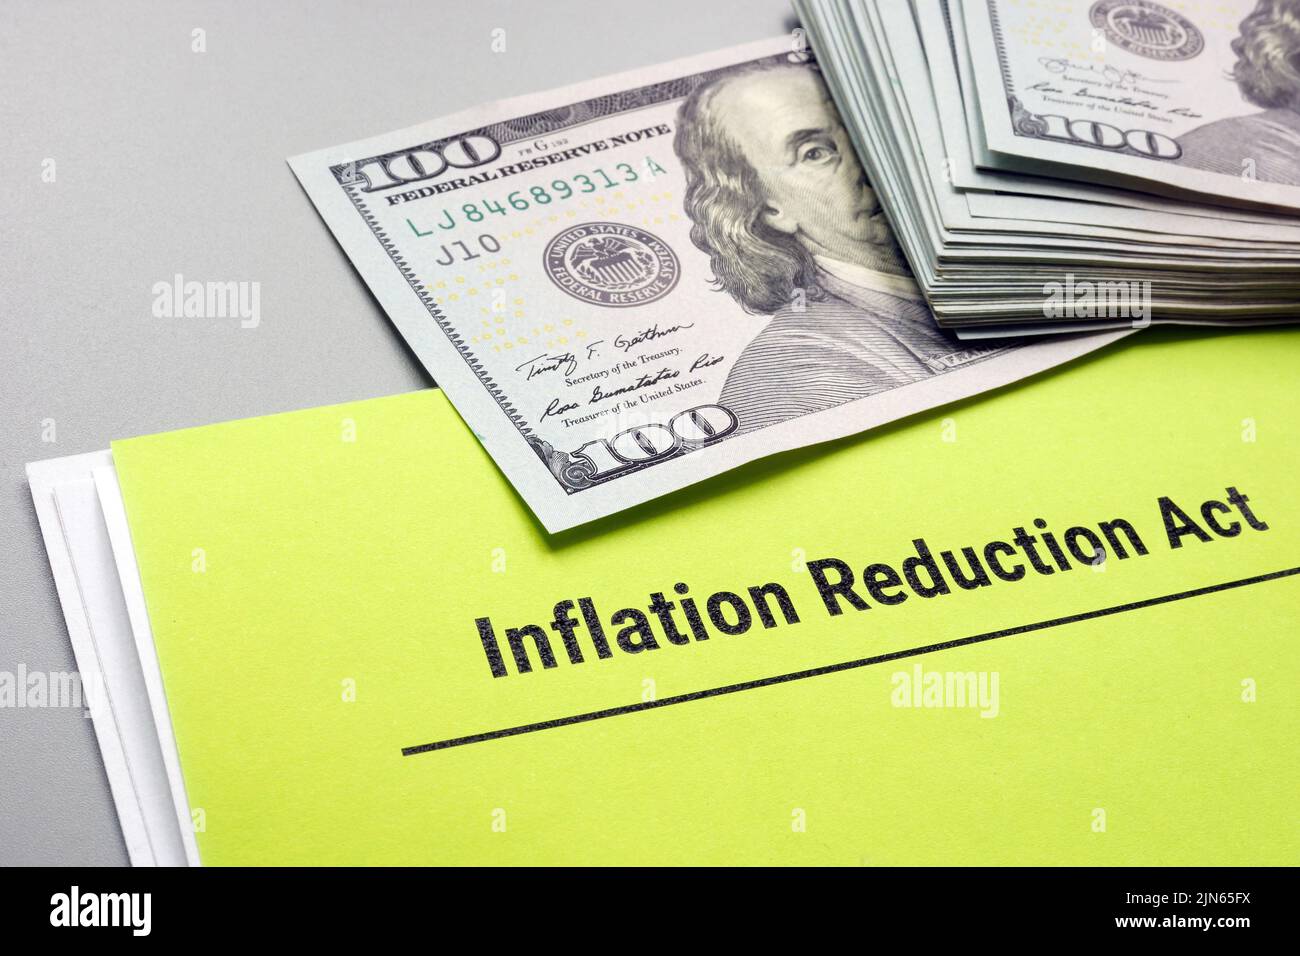 The Inflation Reduction Act of 2022 and cash on it. Stock Photo